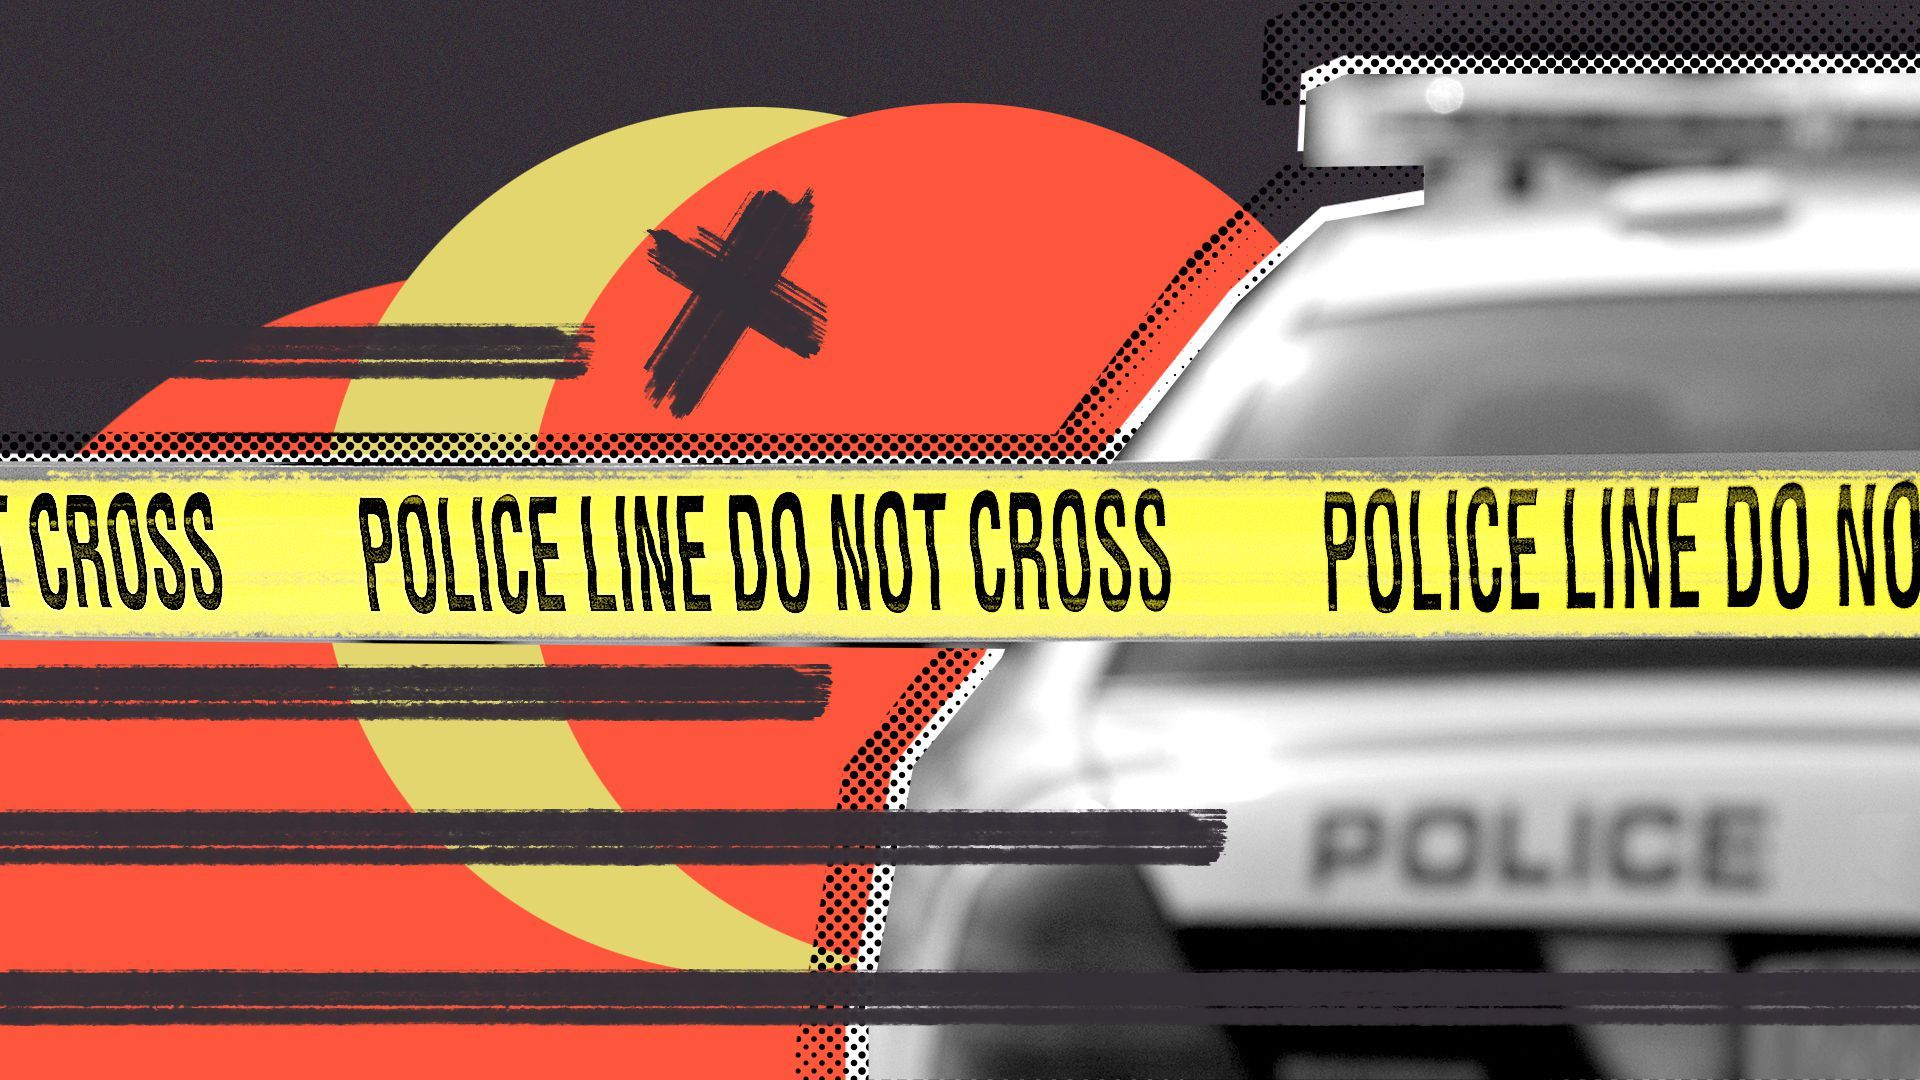 Illustration collage of a police car behind yellow police tape, surrounded by graphic shapes.